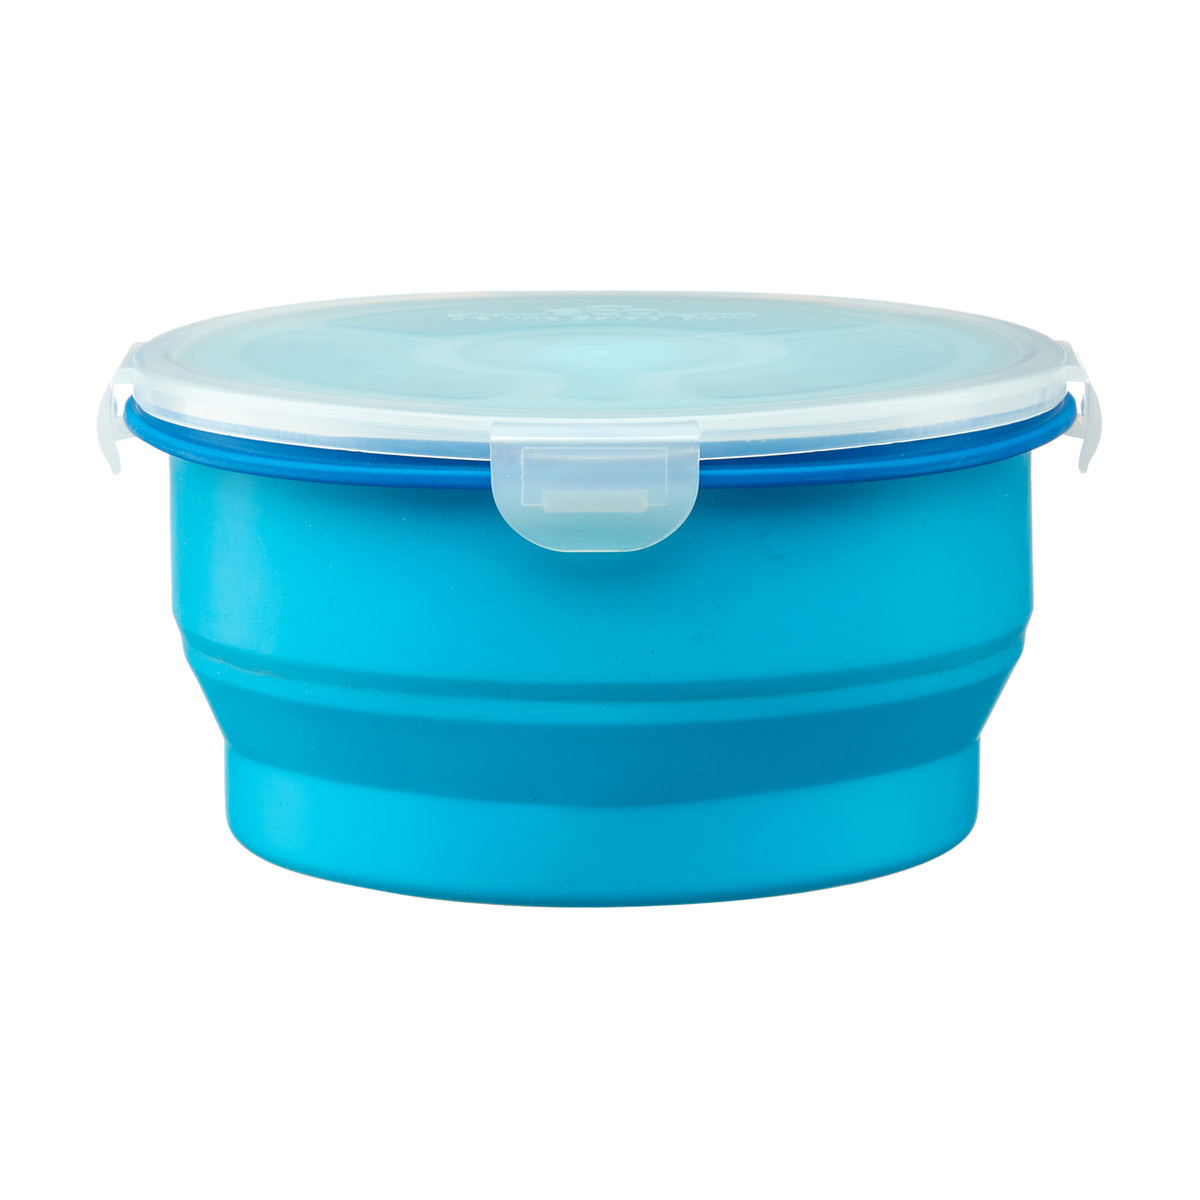 Eco Collapsible Deluxe Salad Bowl from Smart Planet: Review and